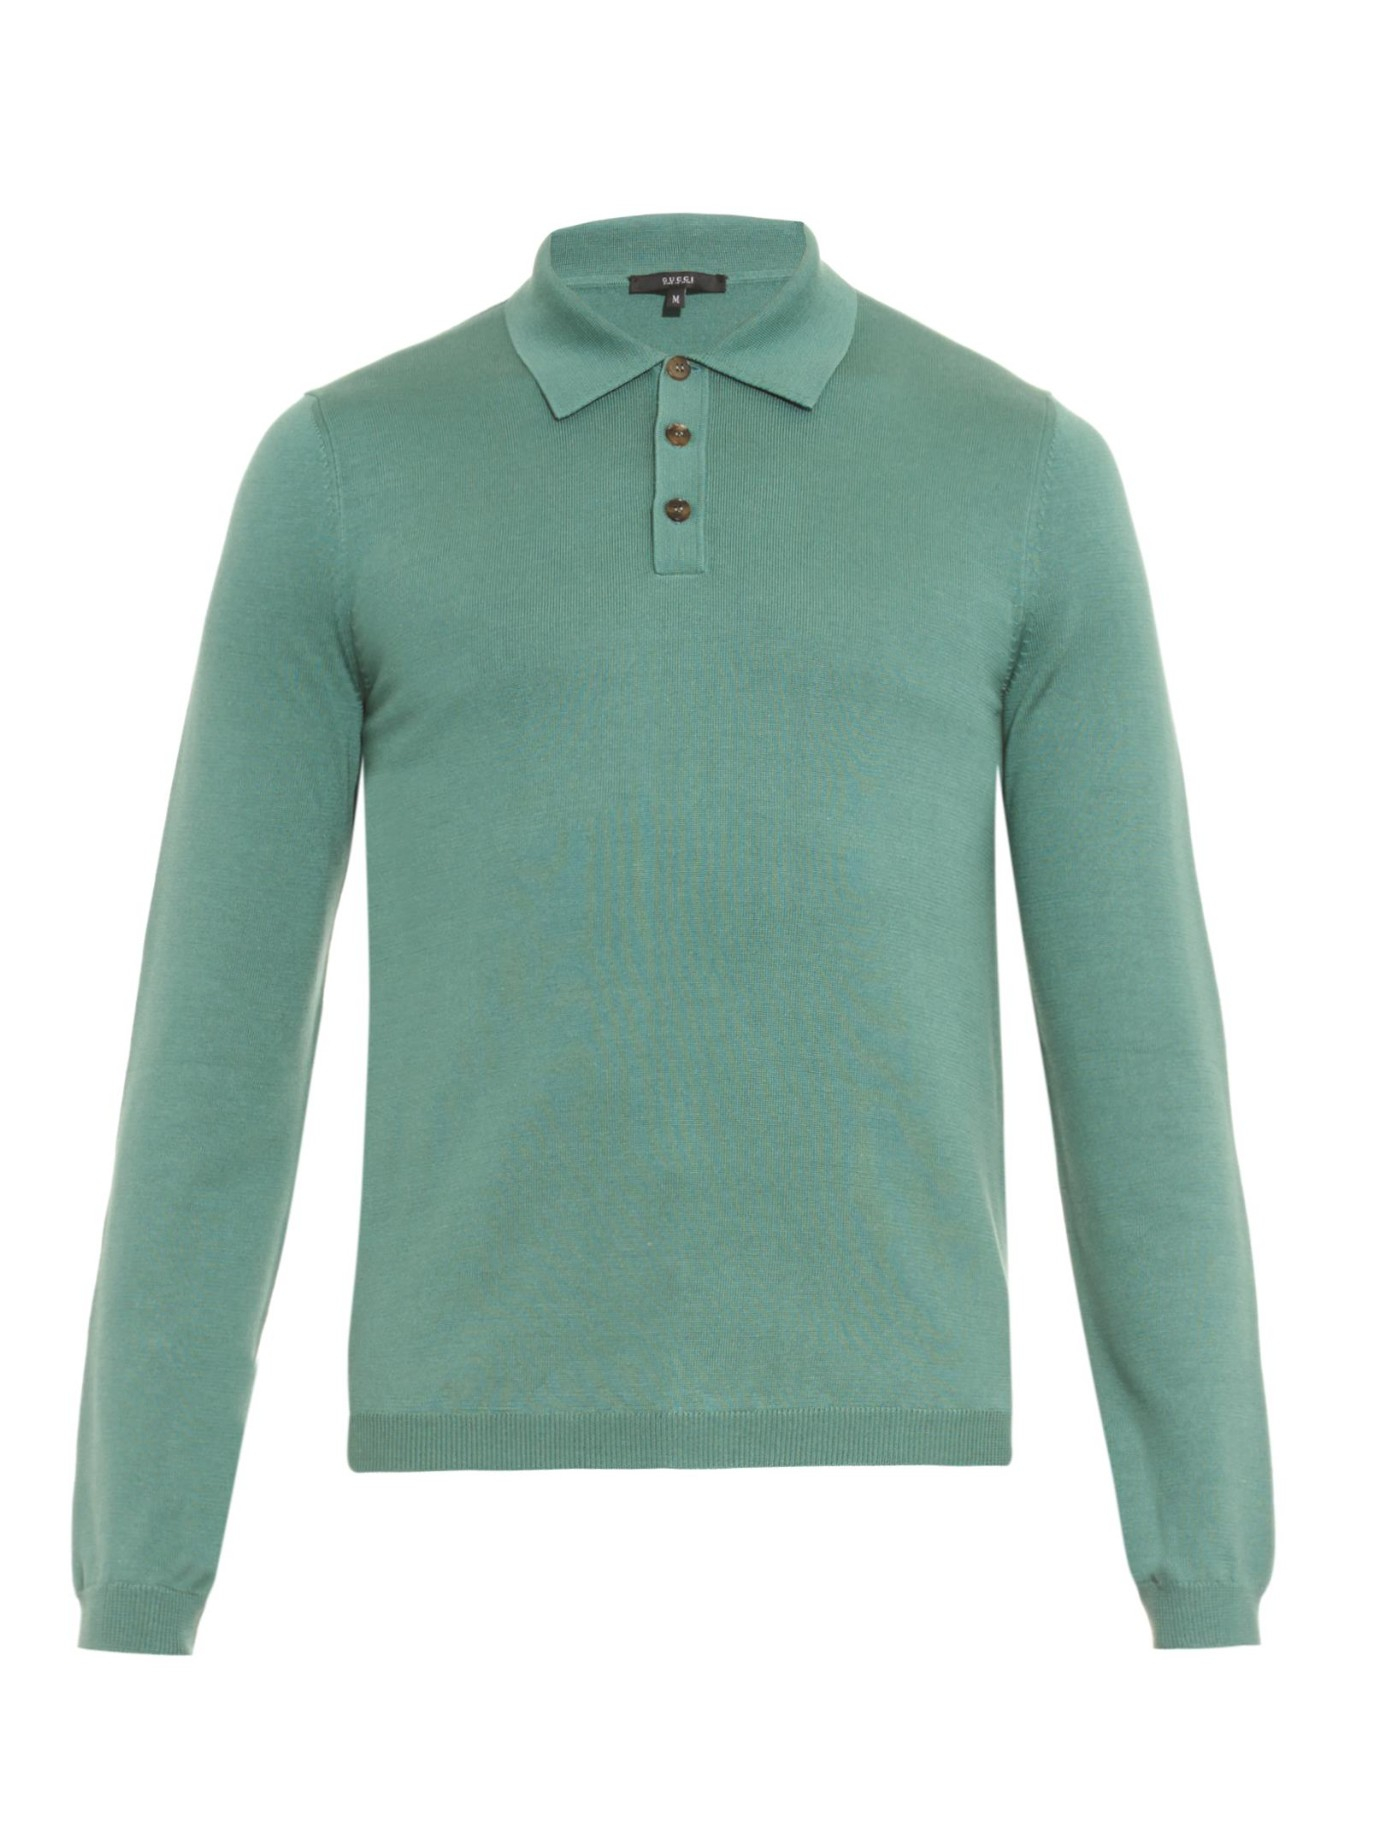 Lyst - Gucci Silk And Cotton-blend Polo Shirt in Green for Men